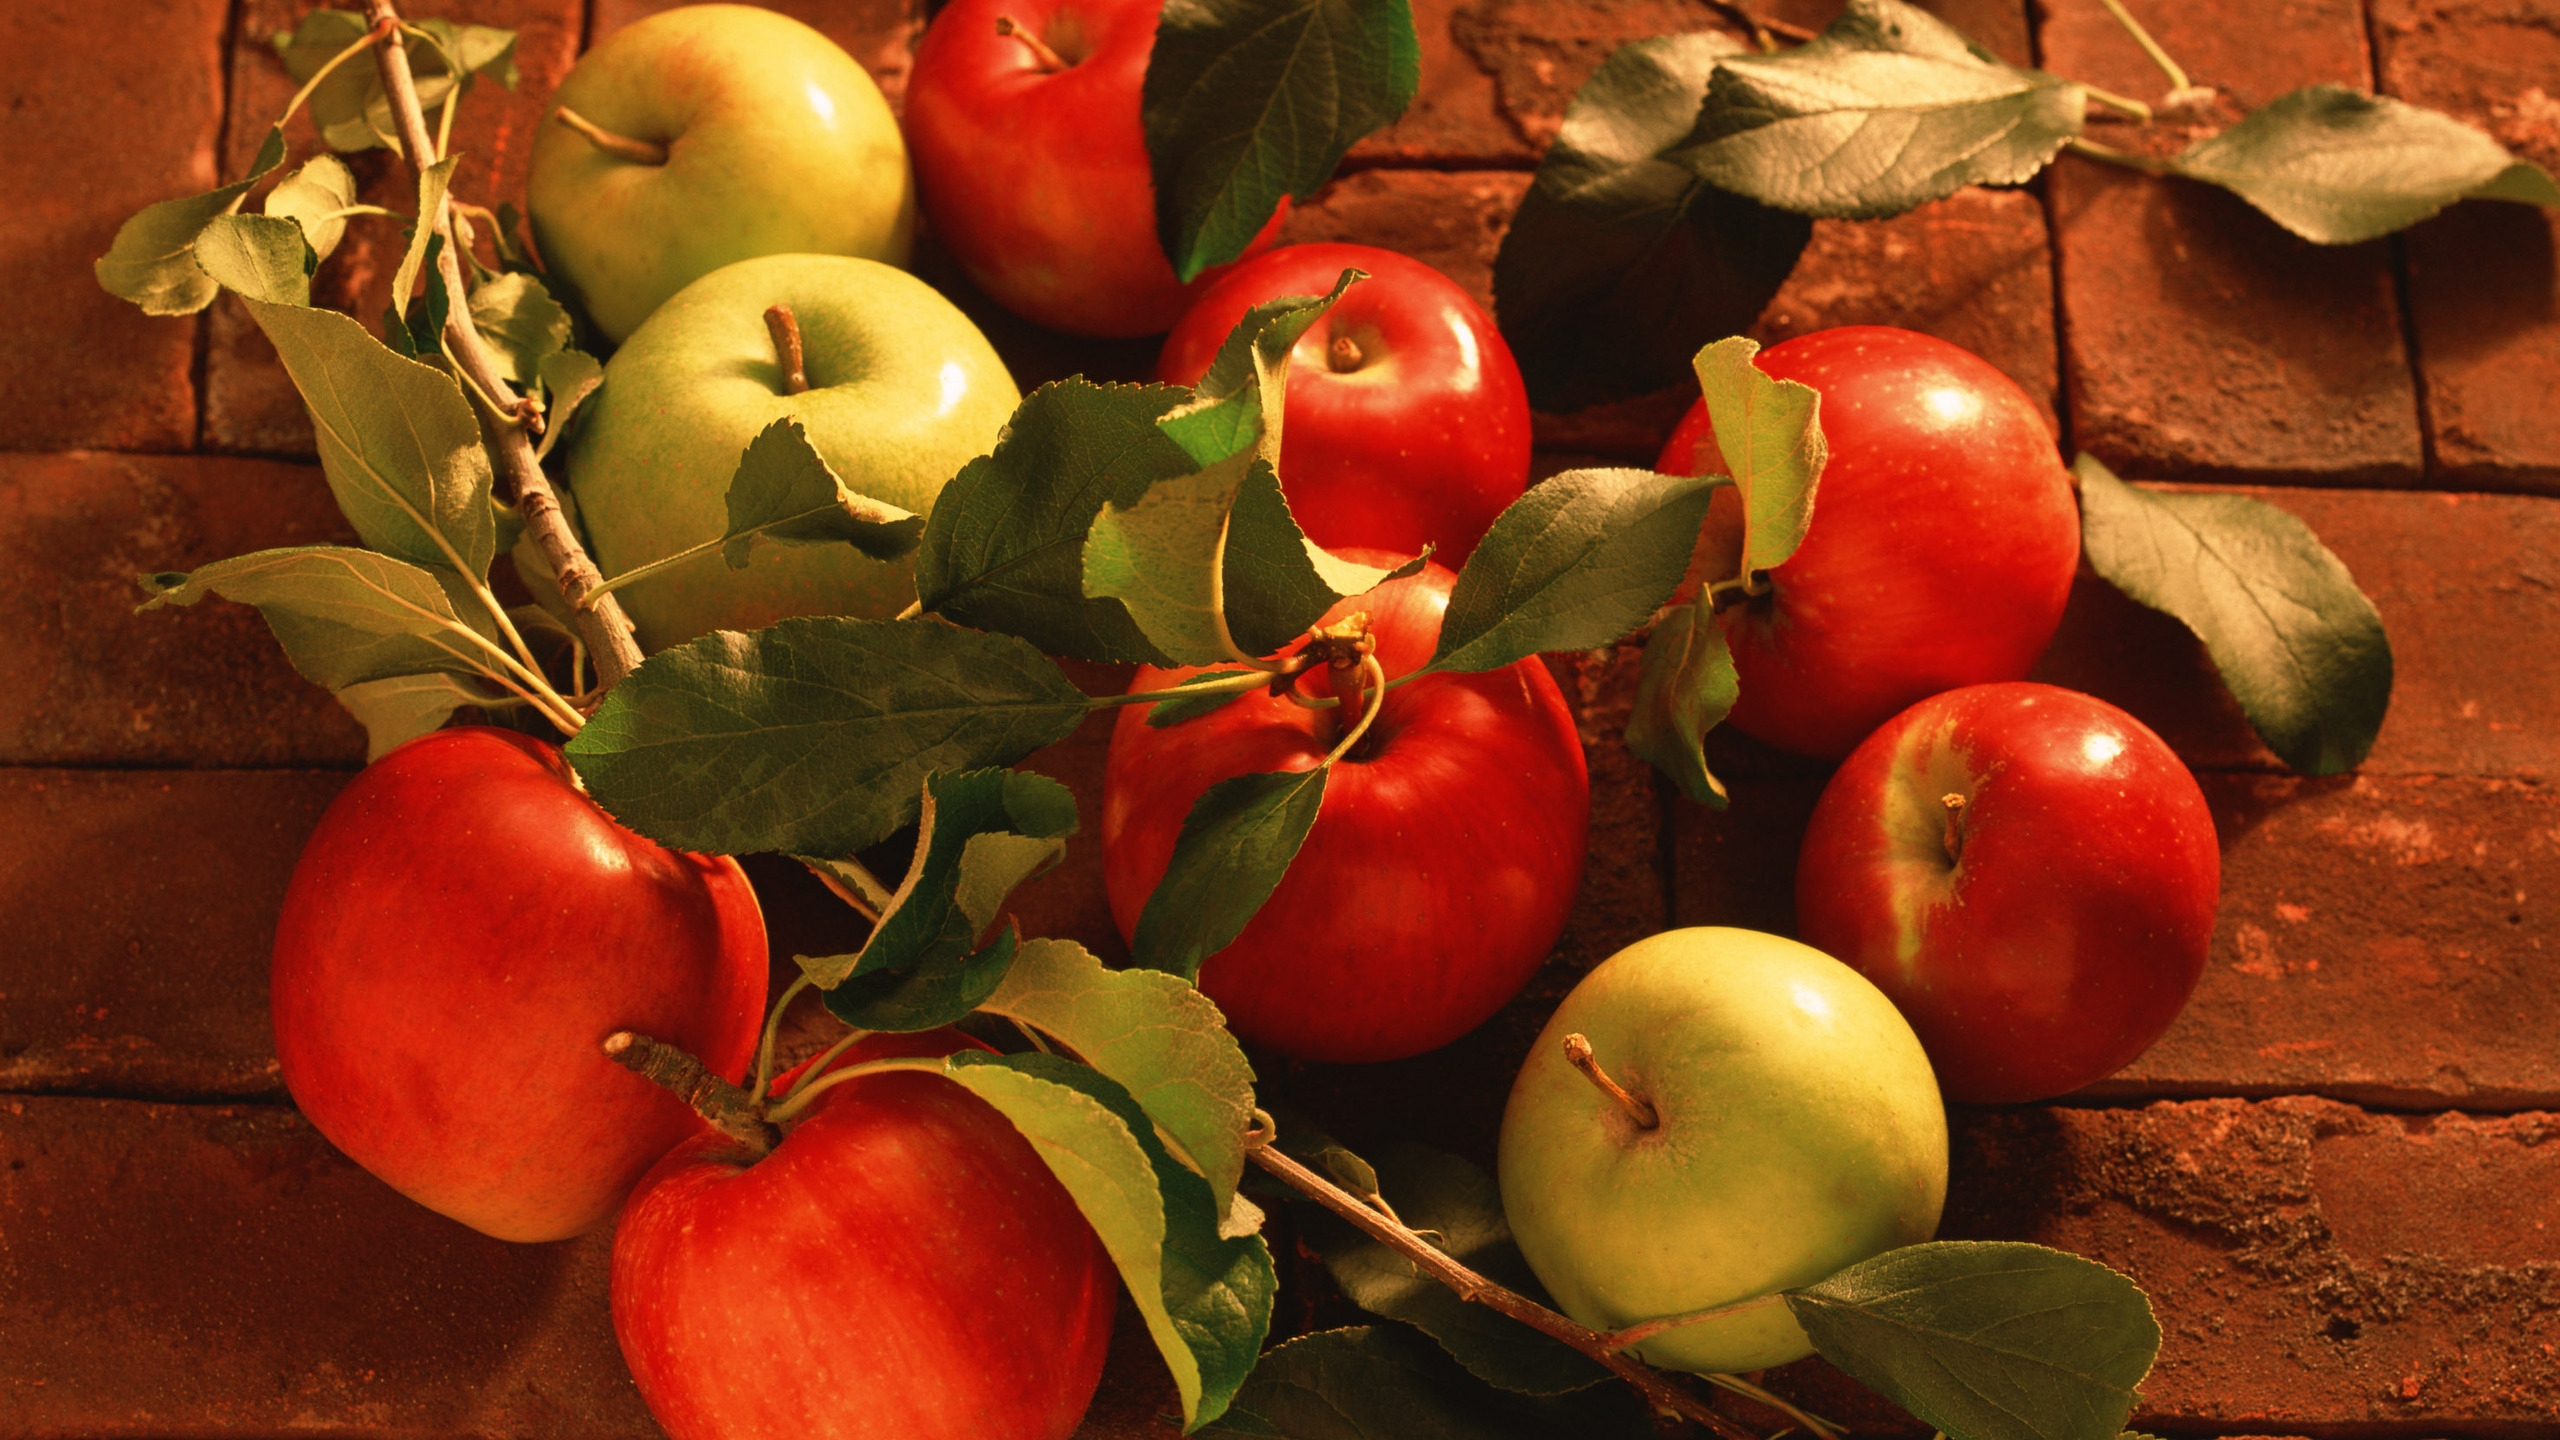 Green and Red Apples for 2560x1440 HDTV resolution